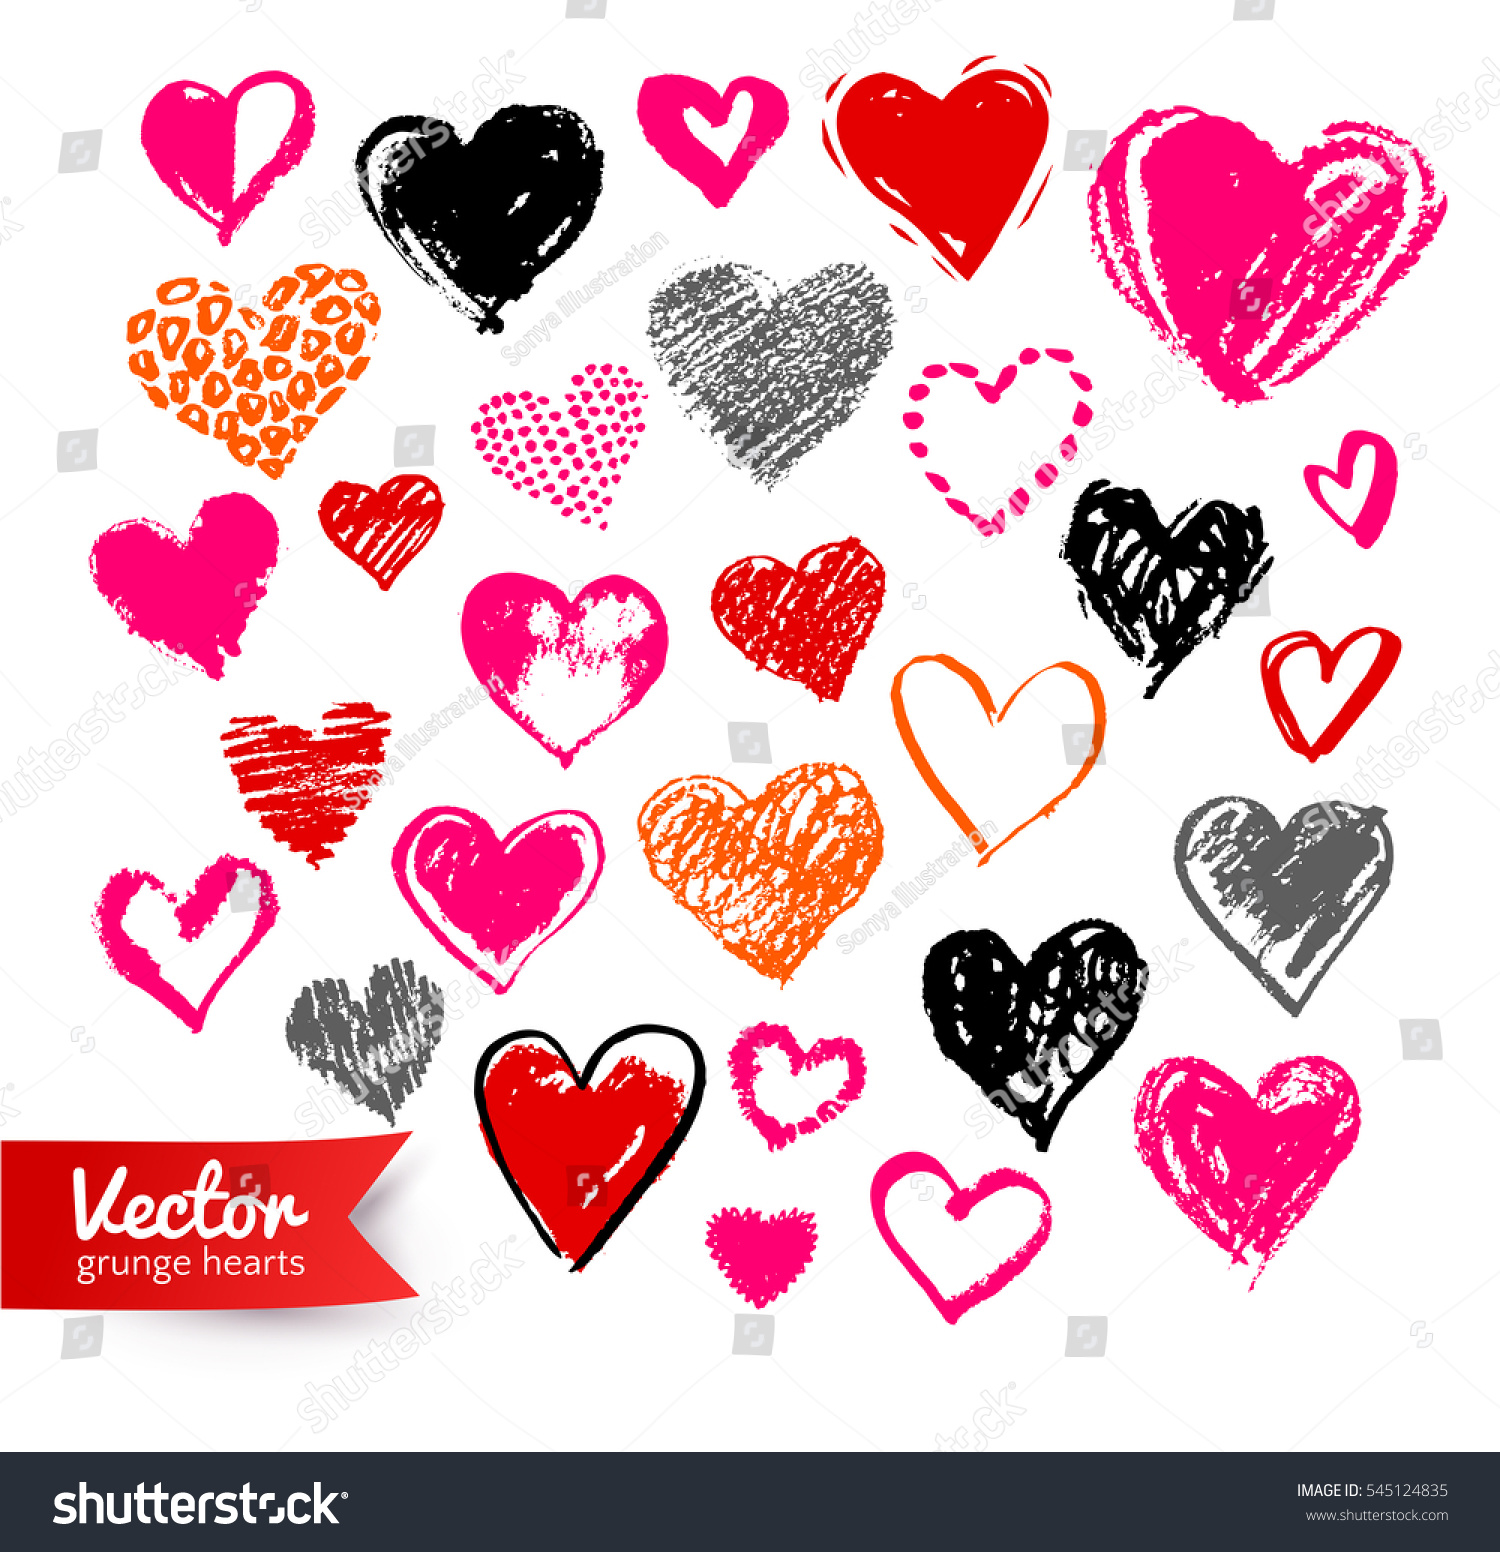 Vector Hand Drawn Collection Grunge Valentine Stock Vector 545124835 ...